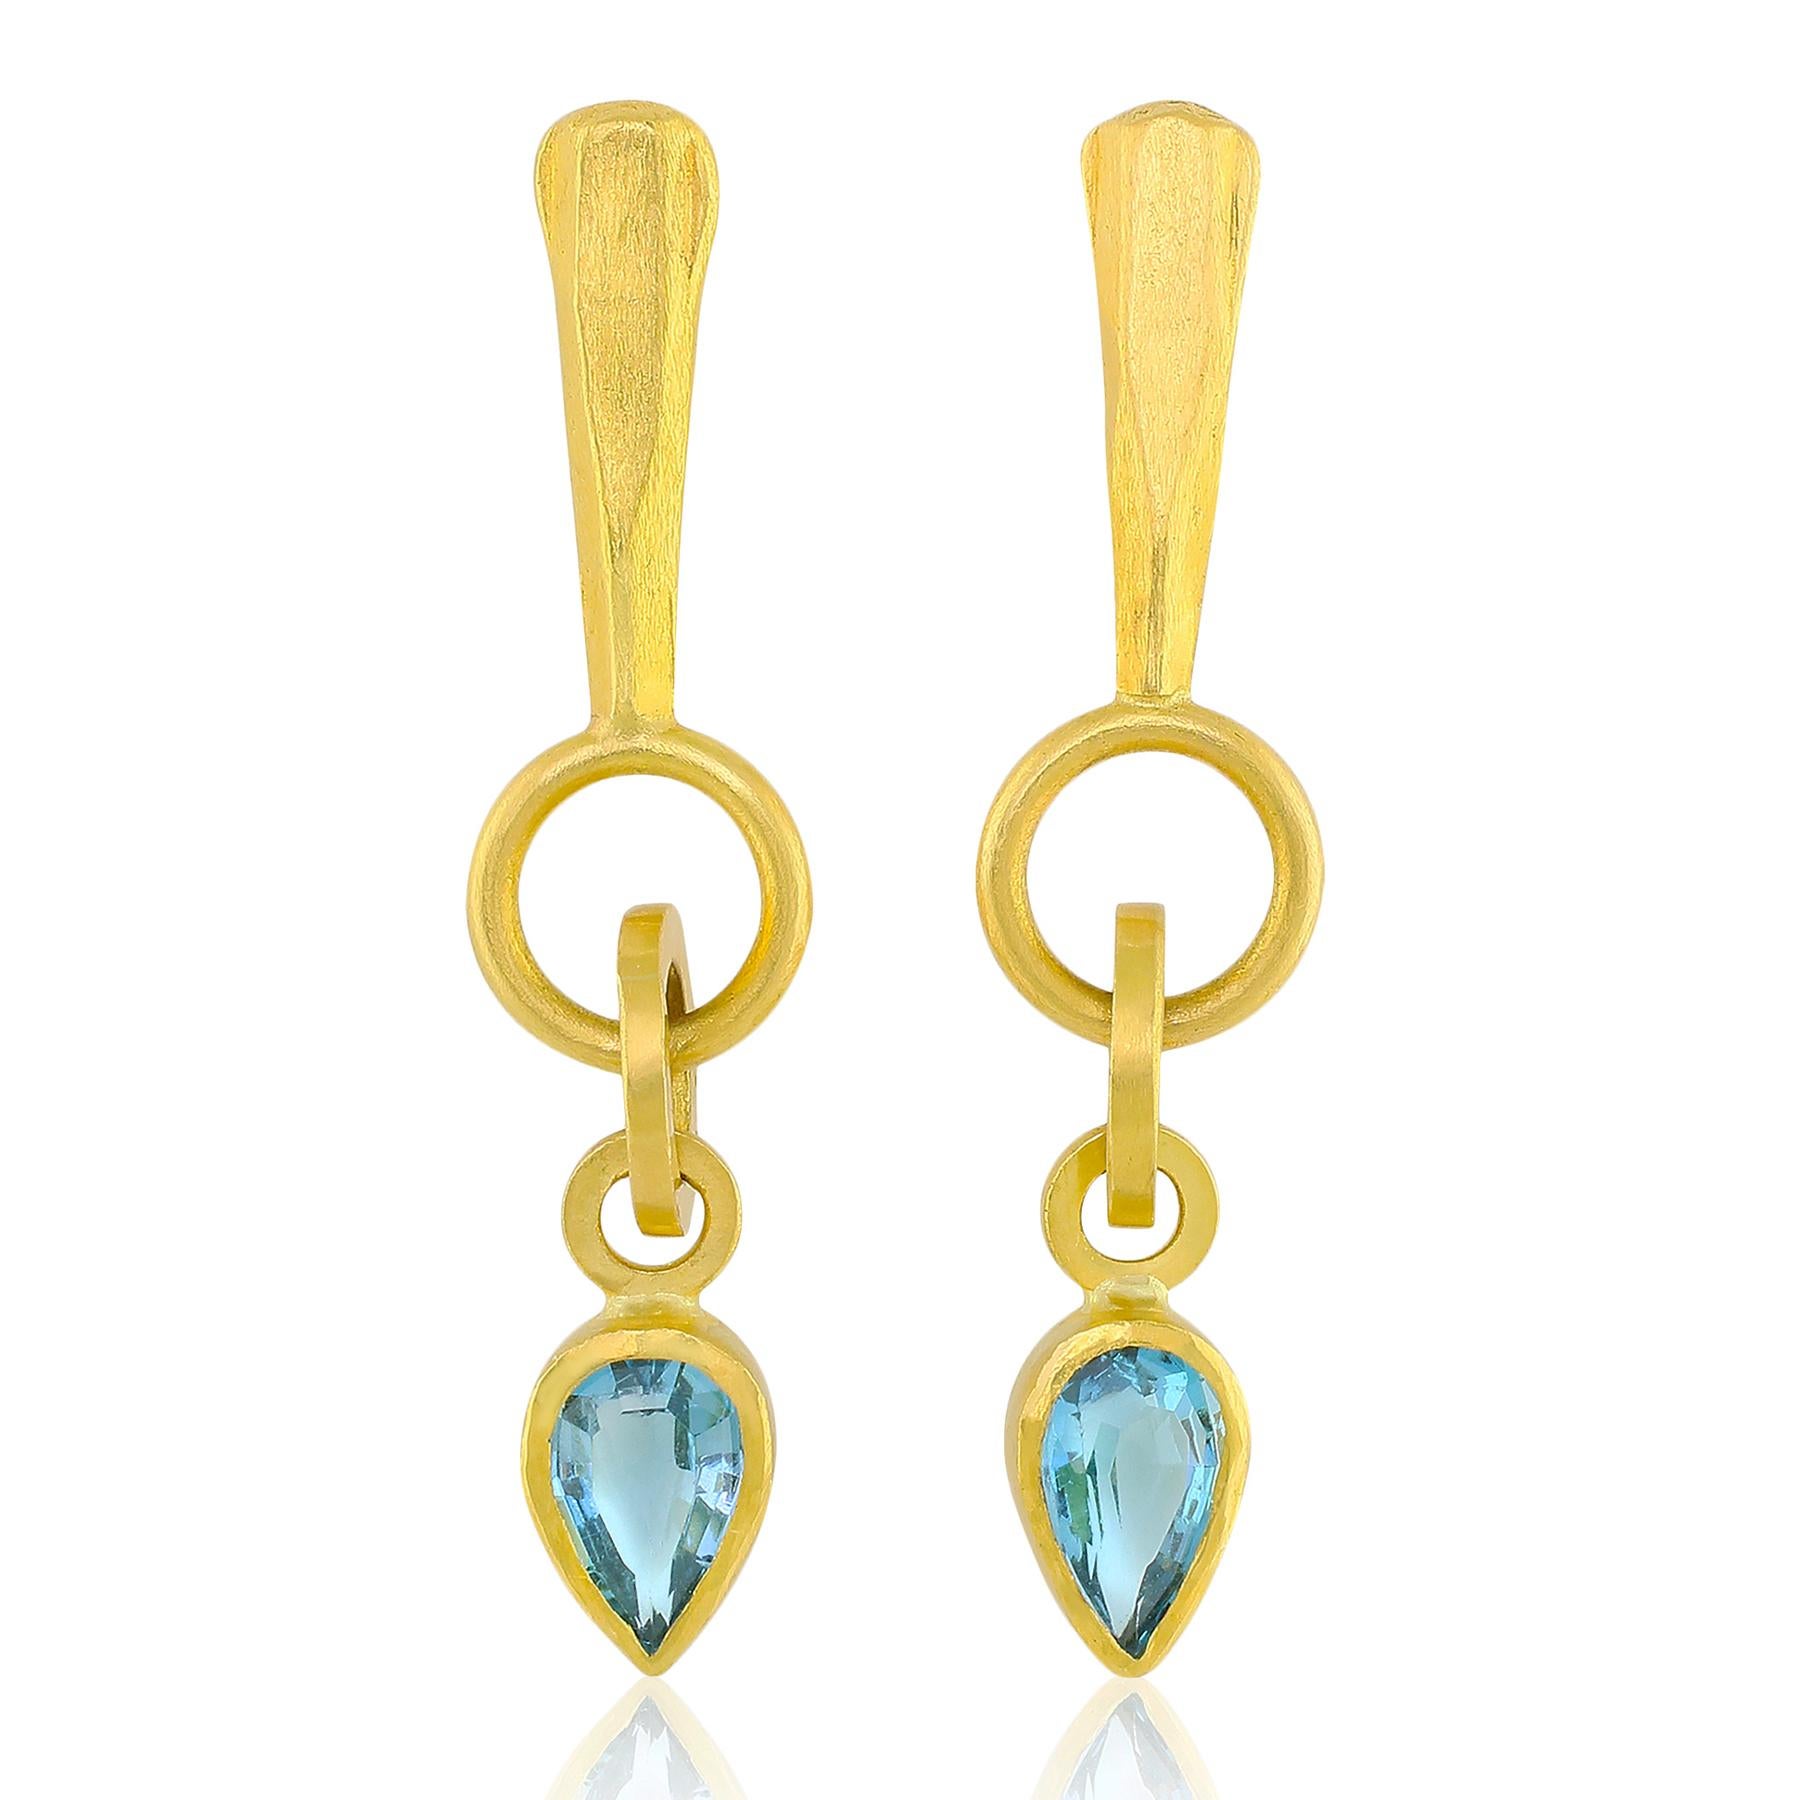 PHILIPPE SPENCER - 7.45 Ct. Total London Blue Topaz Dangling Statement Earrings. Each Topaz set in backless Pure 22K Gold with Solid 20K Gold Connection Links & Features. 18K Post Back & Friction Nut for durability. 

These beautiful and unique